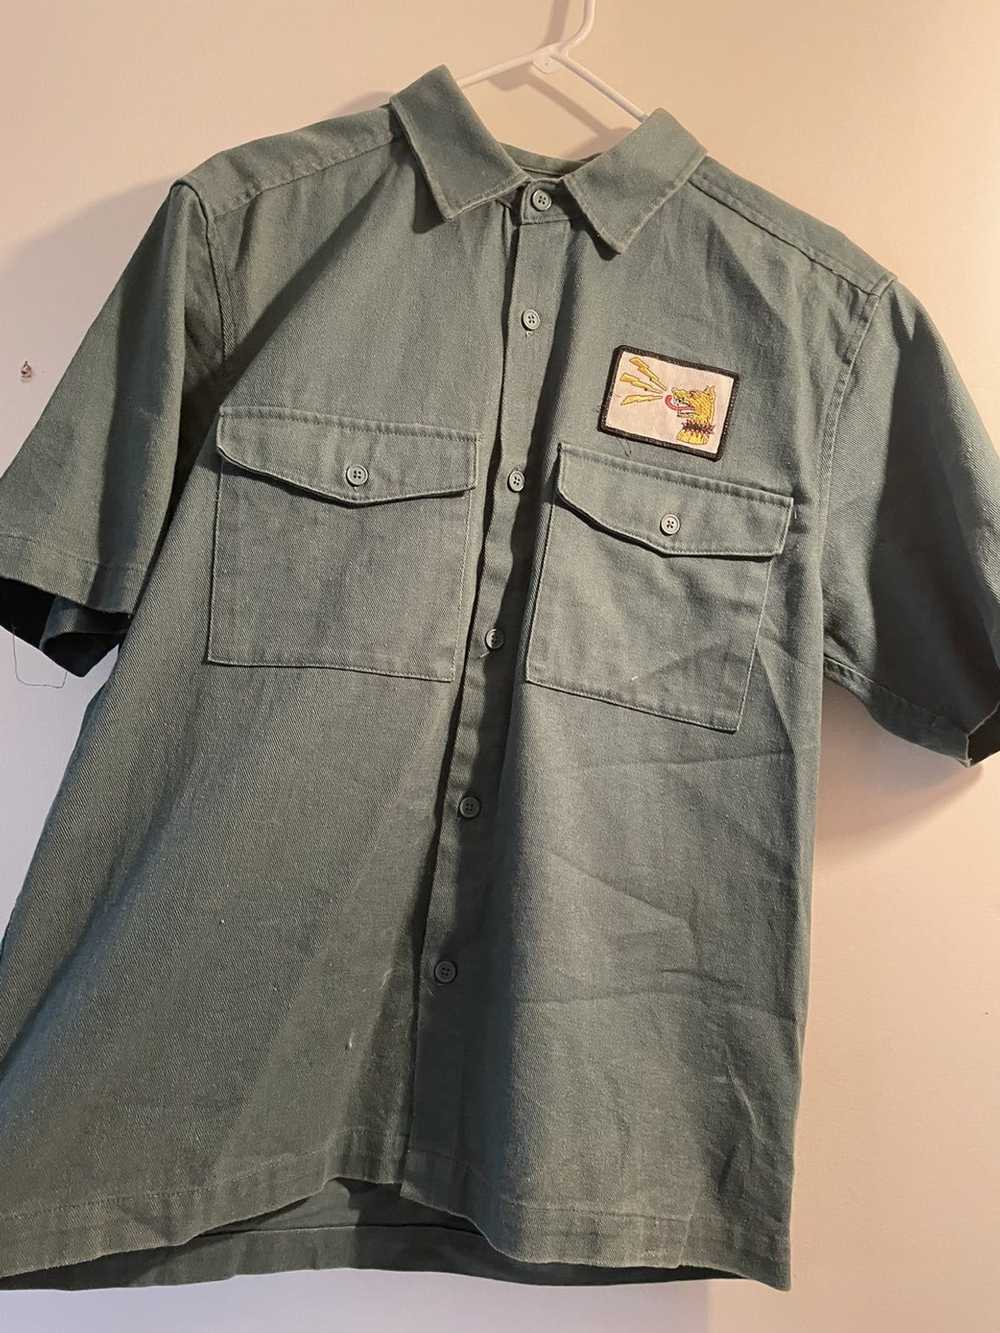 Urban Outfitters Urban outfitters work shirt - image 2